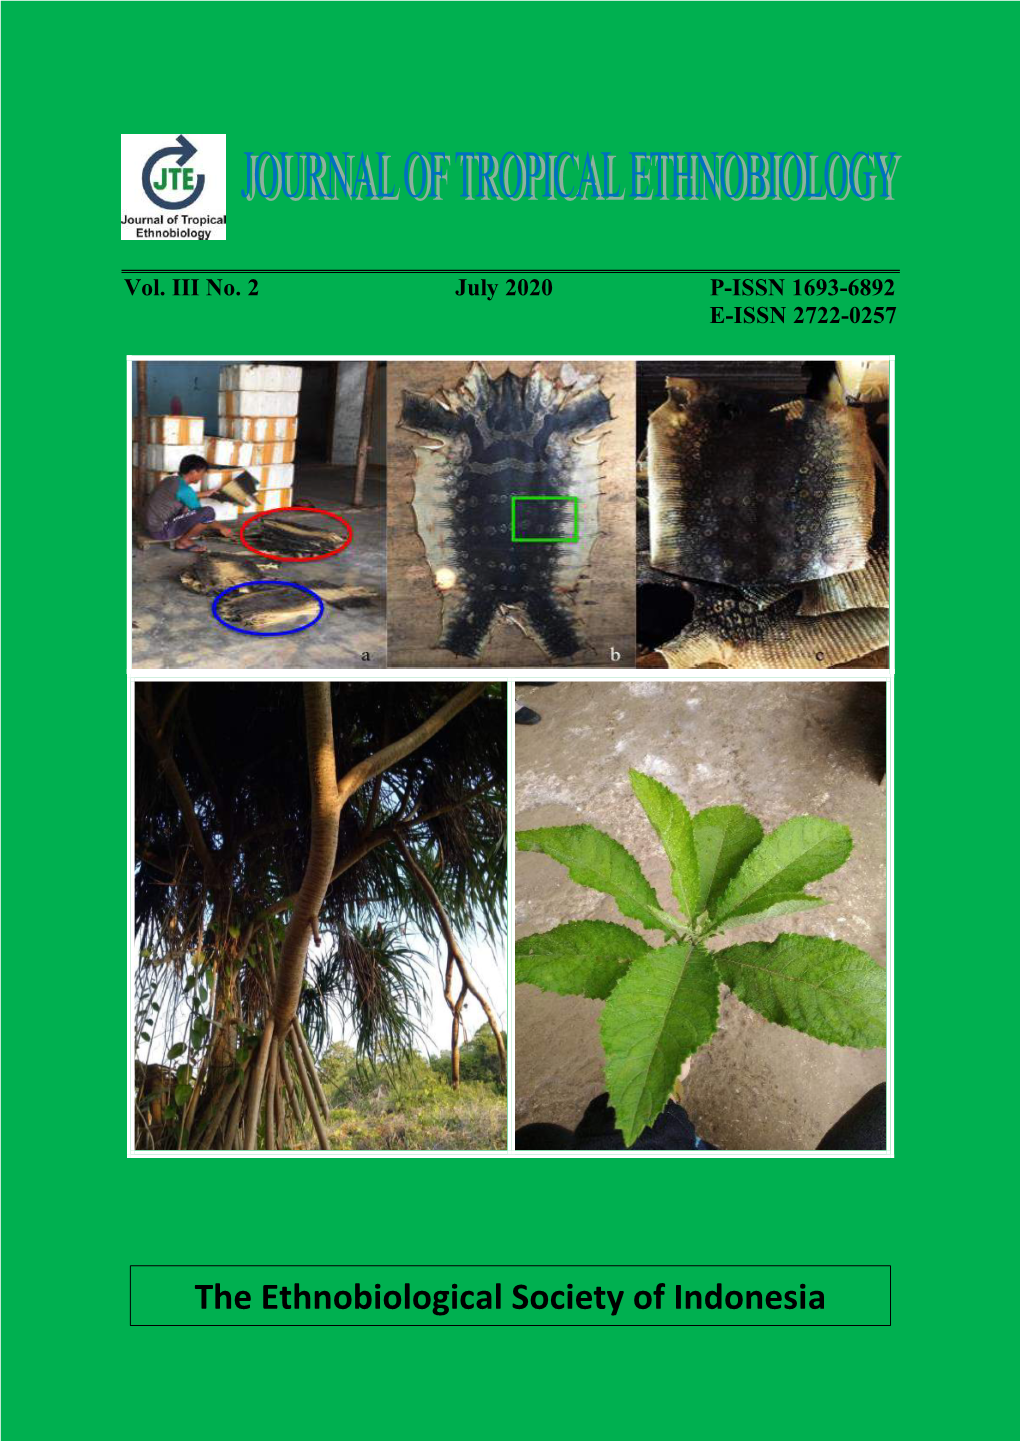 The Ethnobiological Society of Indonesia Journal of Tropical Ethnobiology Vol.3 No.2 (2020): 124-132 Agustika Et Al